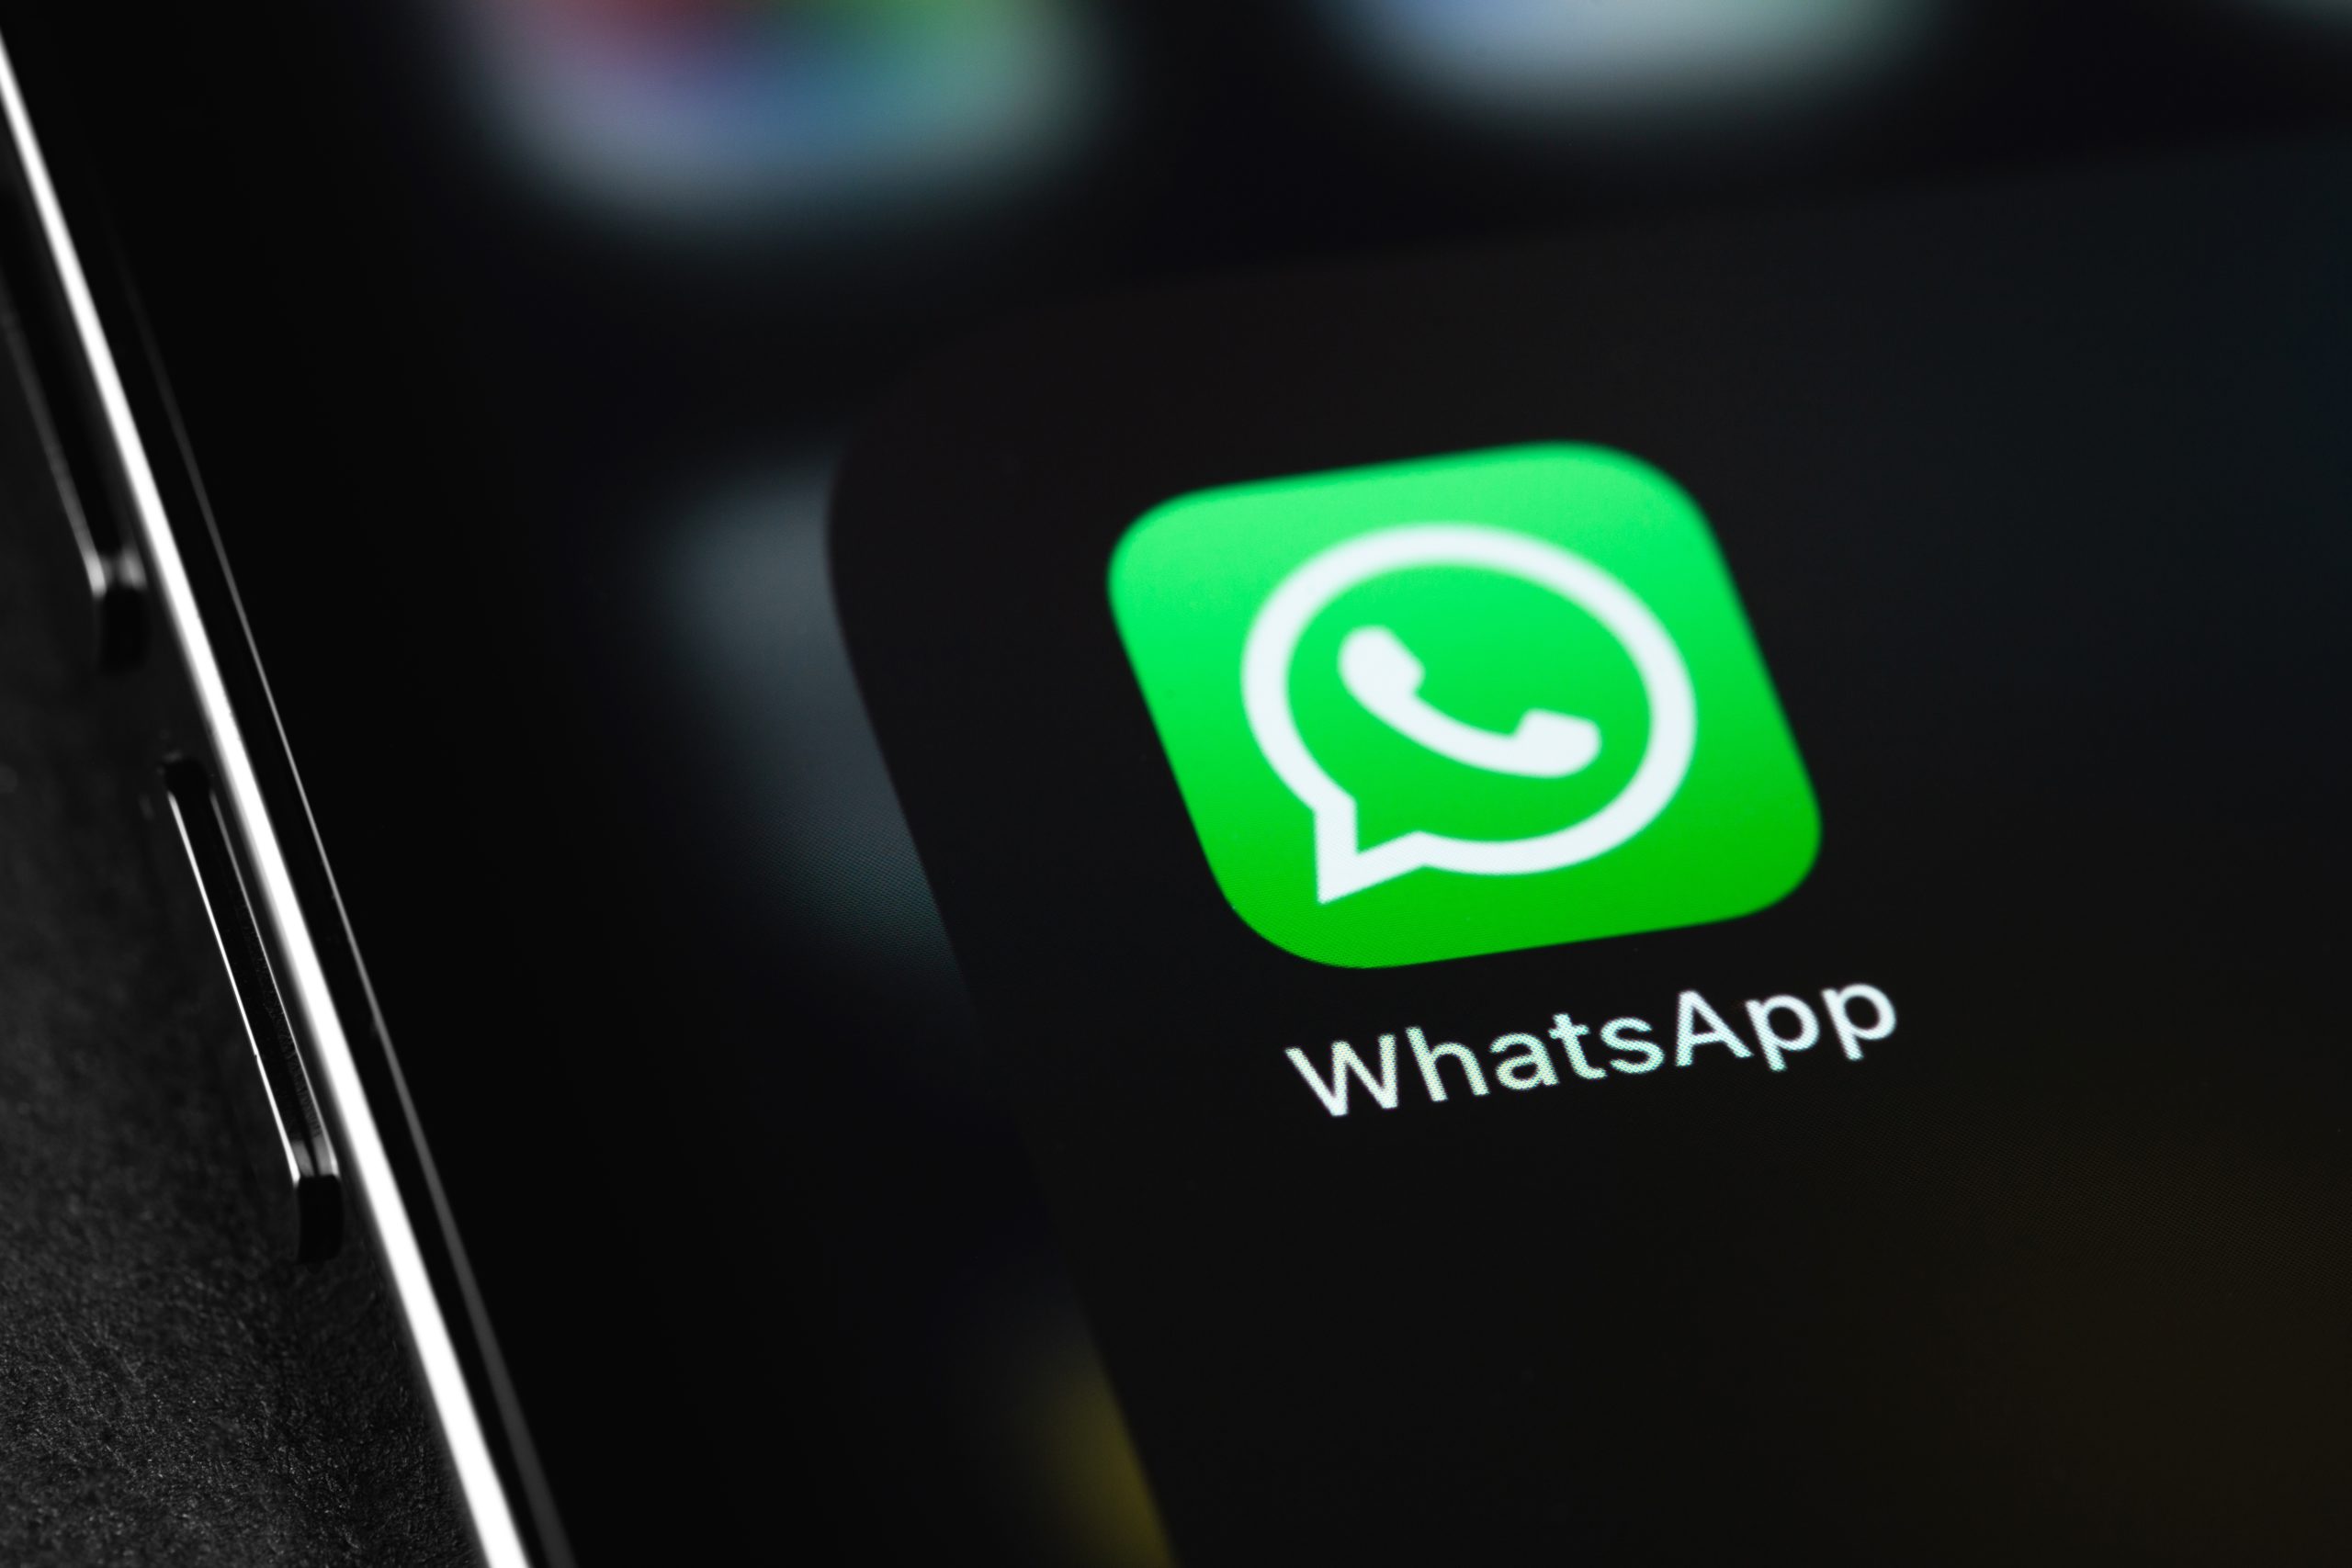 How to send a single audio playback on WhatsApp?